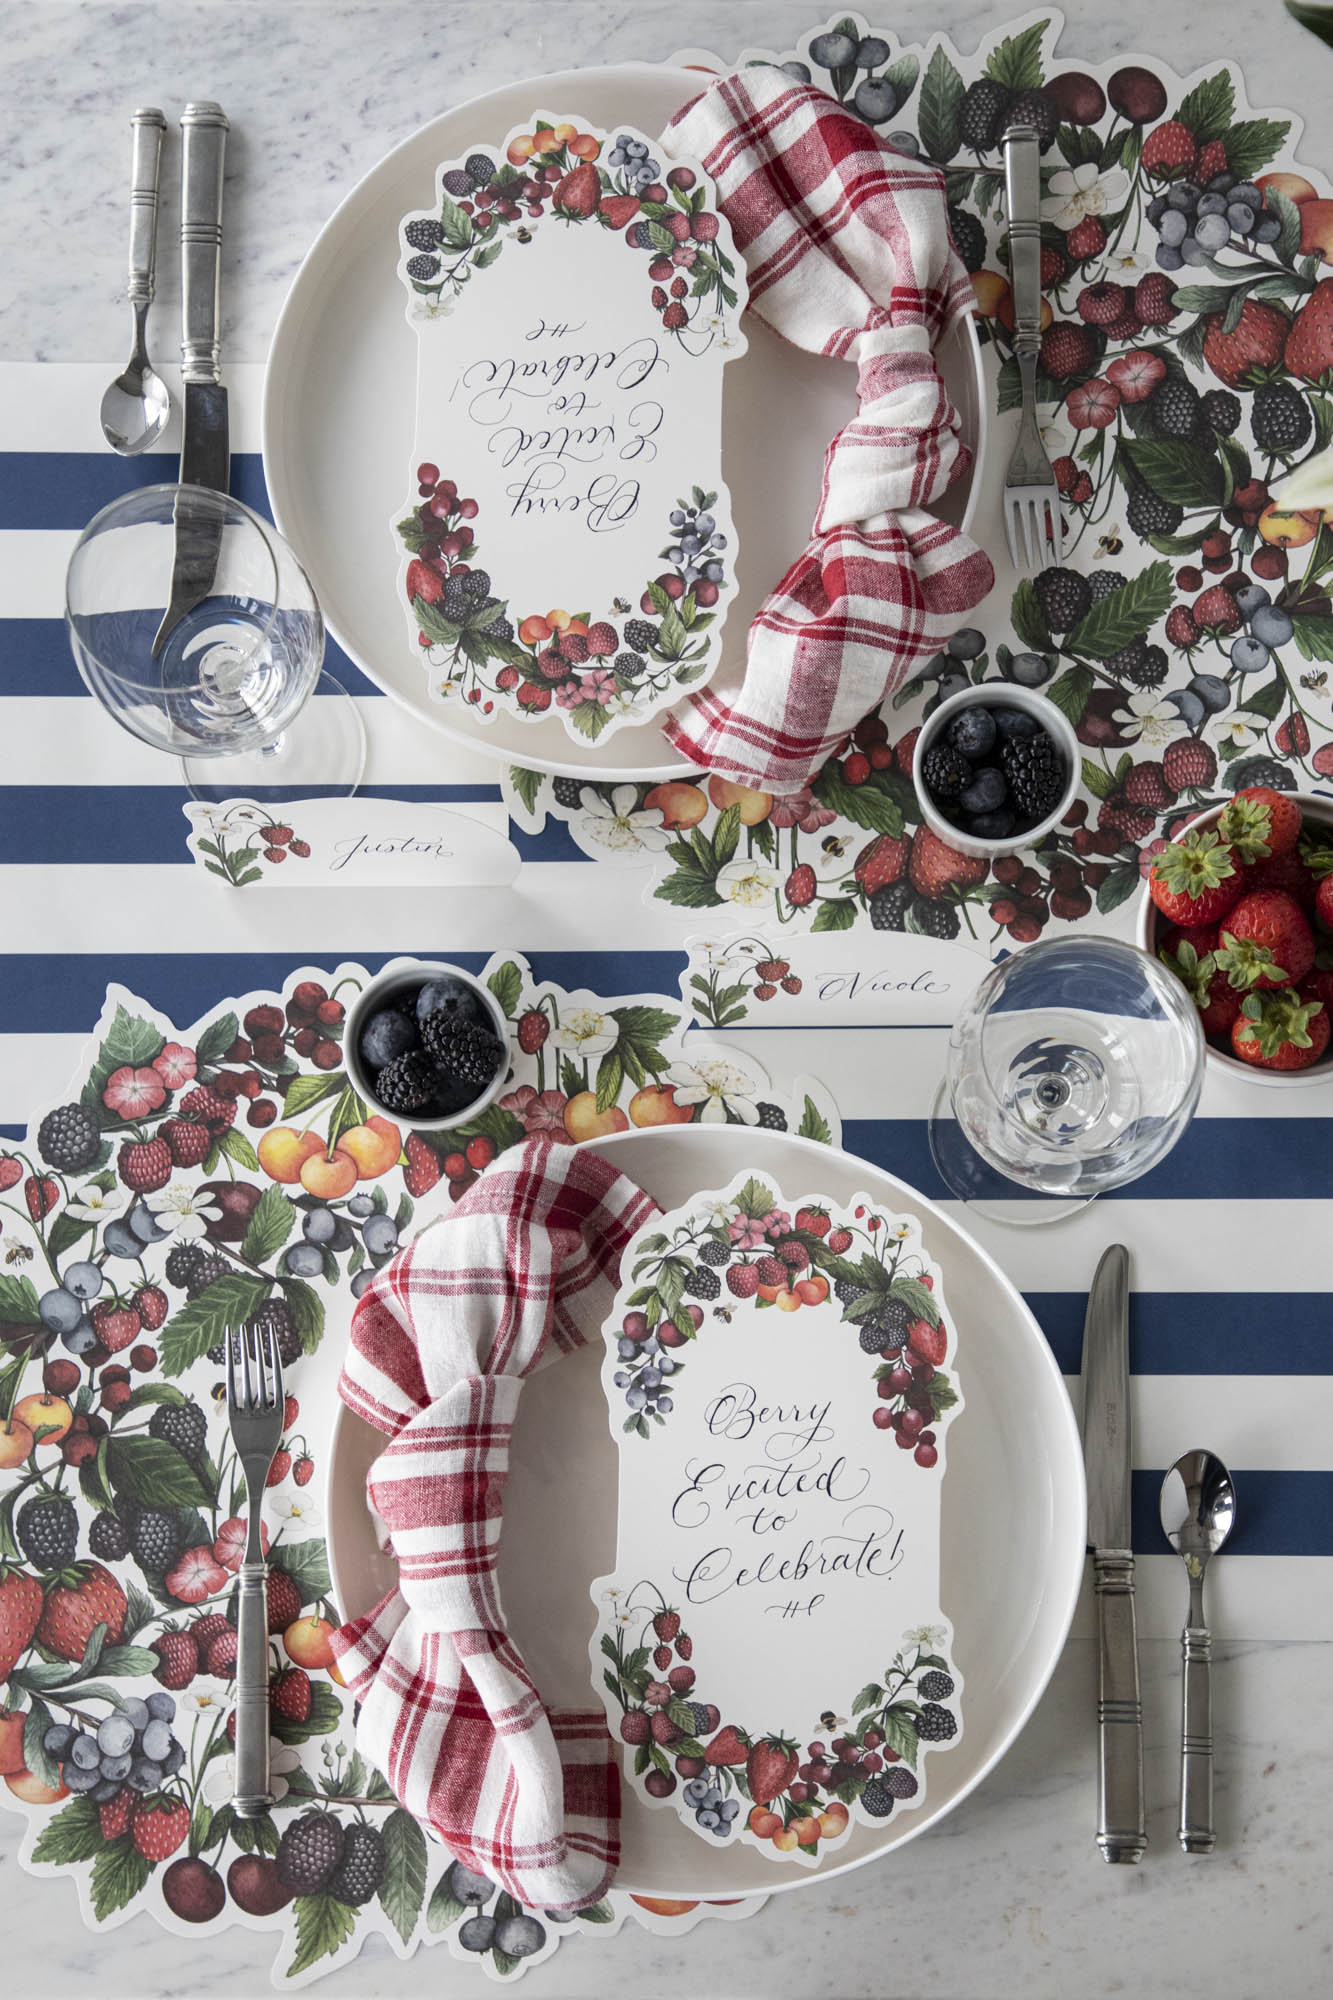 A berry-themed table setting for two featuring a Berry Bramble Table Card resting on each plate.